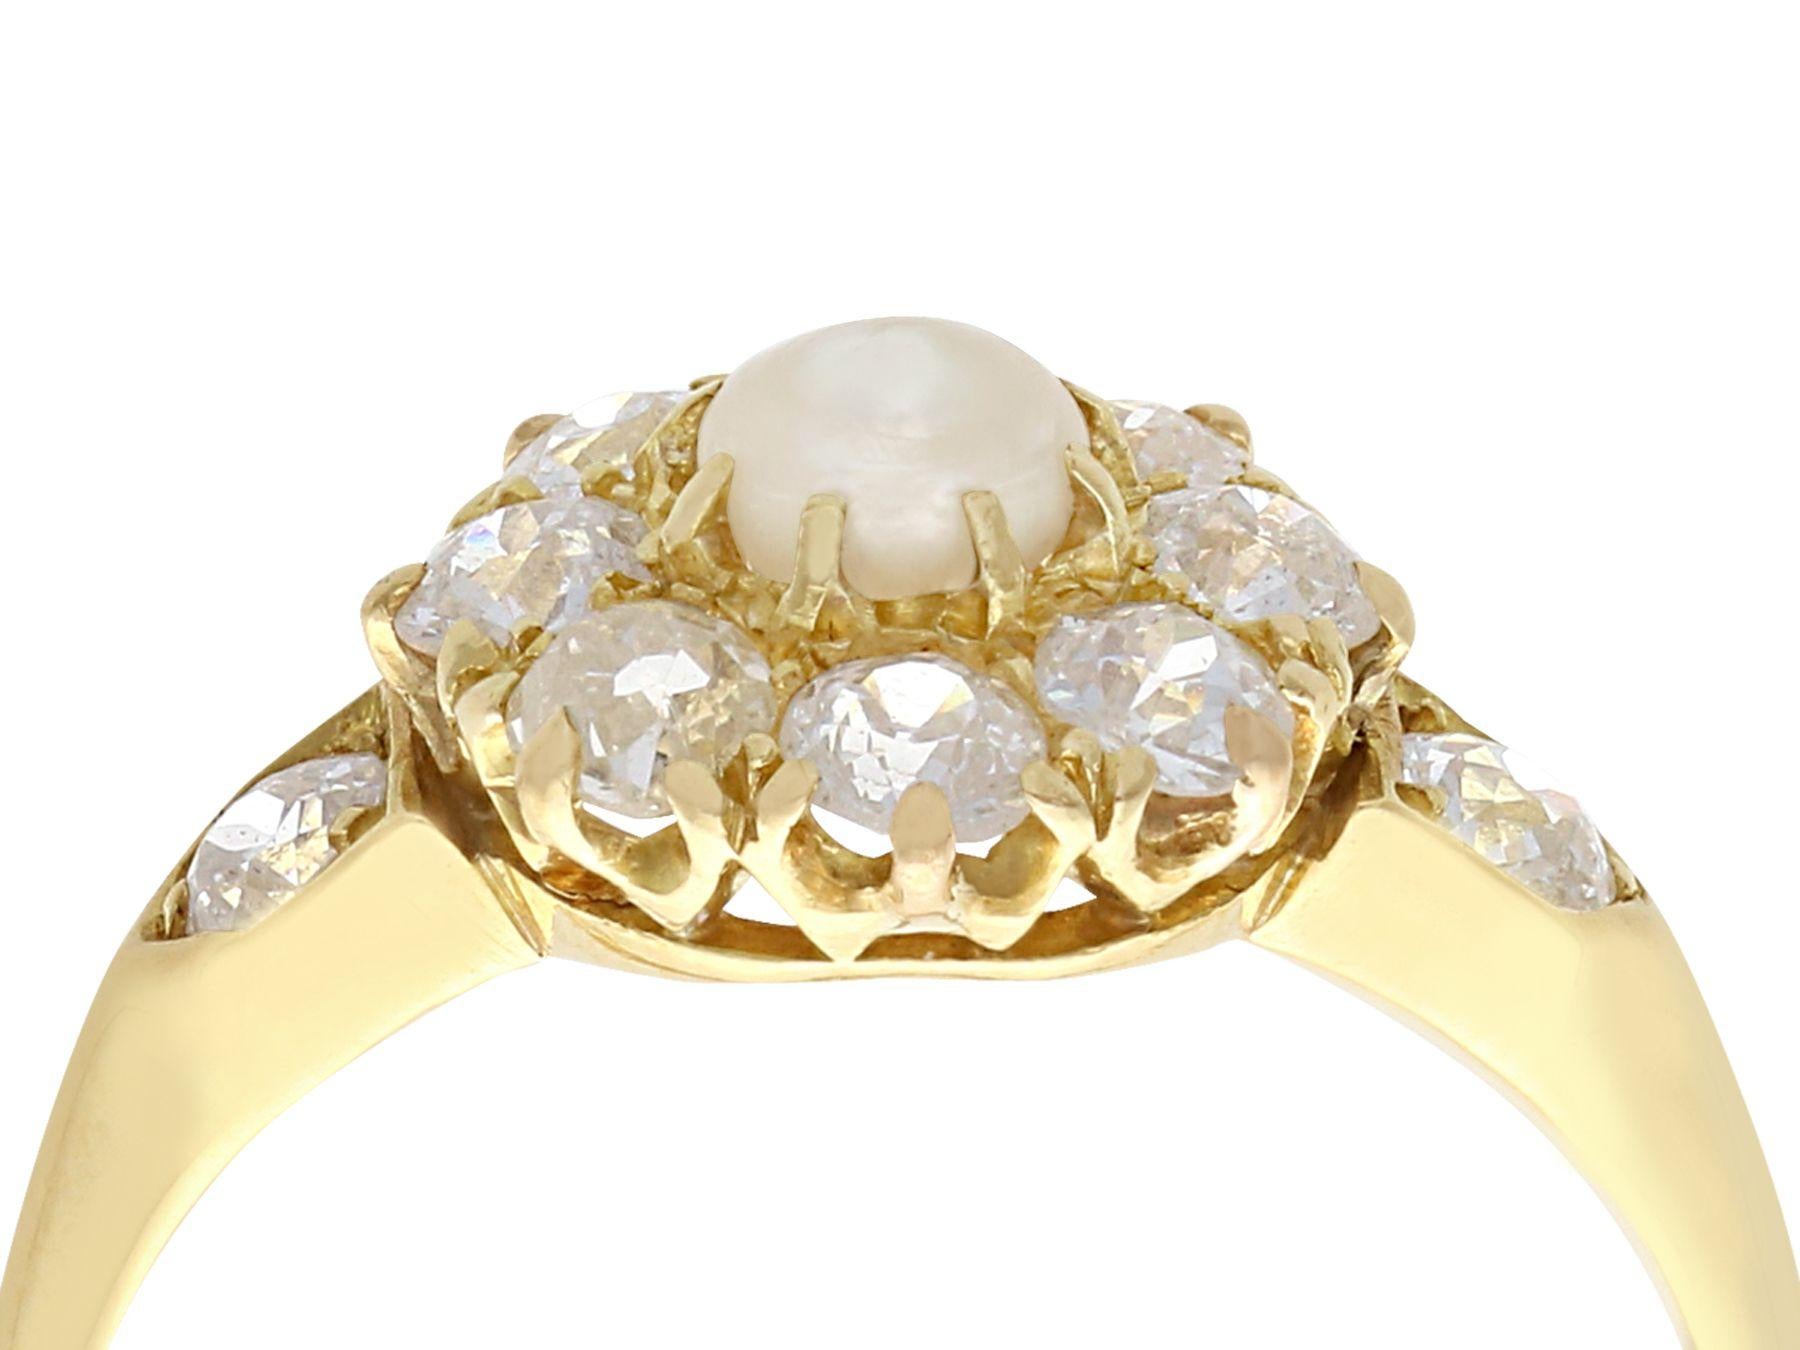 An impressive pearl and 1.15 Ct diamond, 18k yellow gold cluster style cocktail ring; part of our diverse antique jewelry and estate jewelry collections.

This fine and impressive pearl and diamond cluster ring has been crafted in 18k yellow